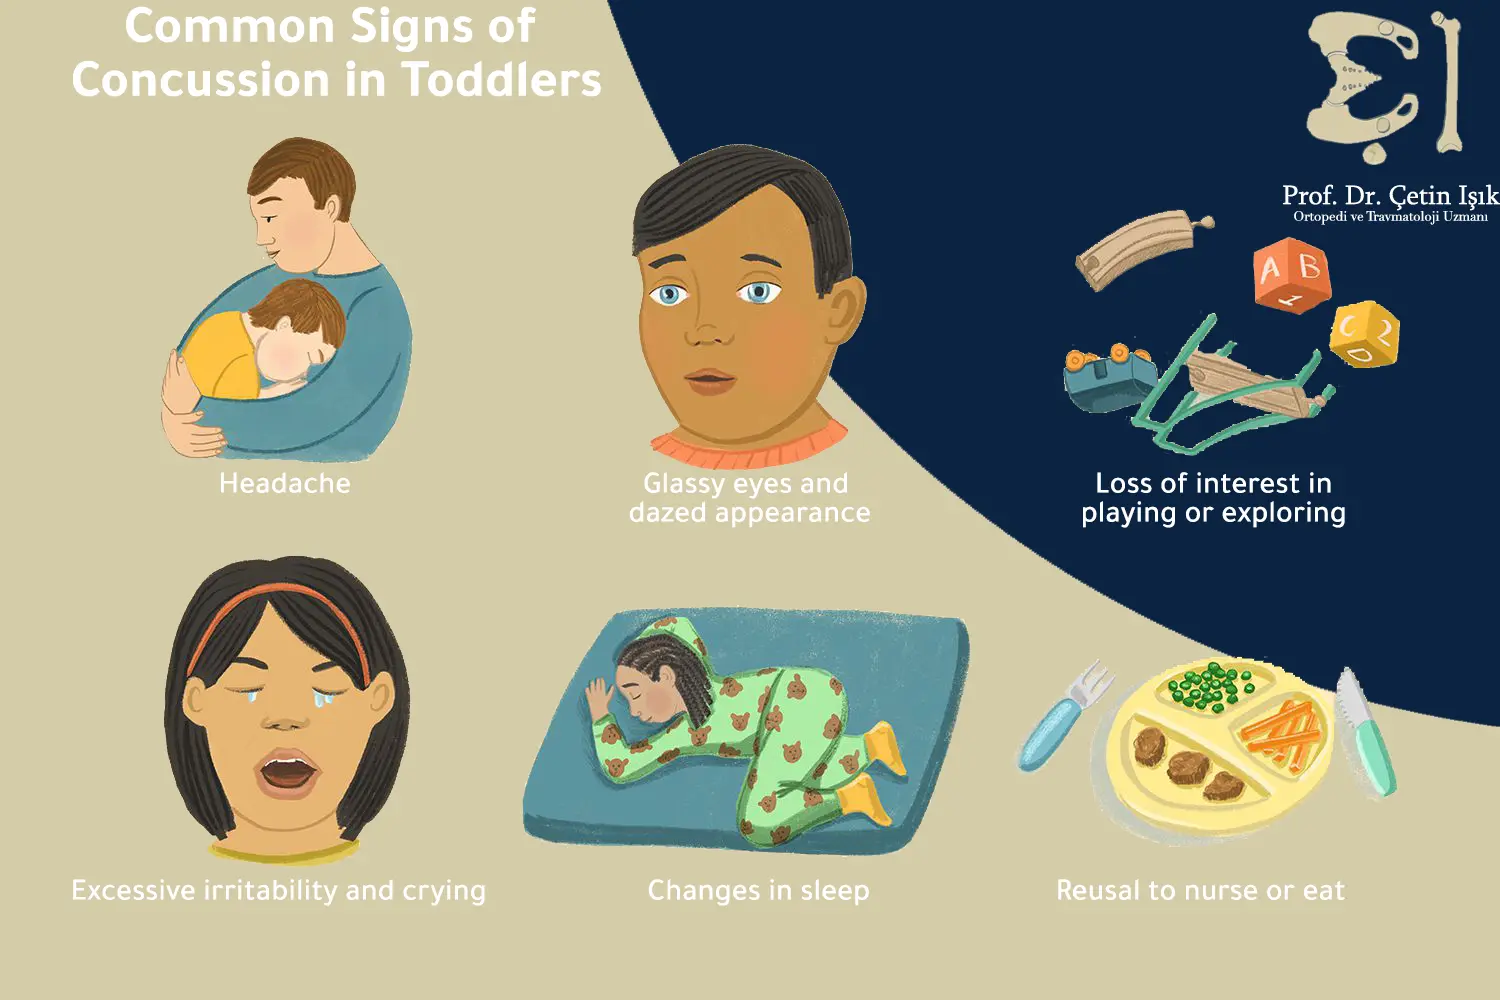 From the picture, we notice the most important symptoms of a brain concussion that need treatment, which are crying, headache, refusal to eat, changes in sleep, glassy eyes, and loss of interest in playing.